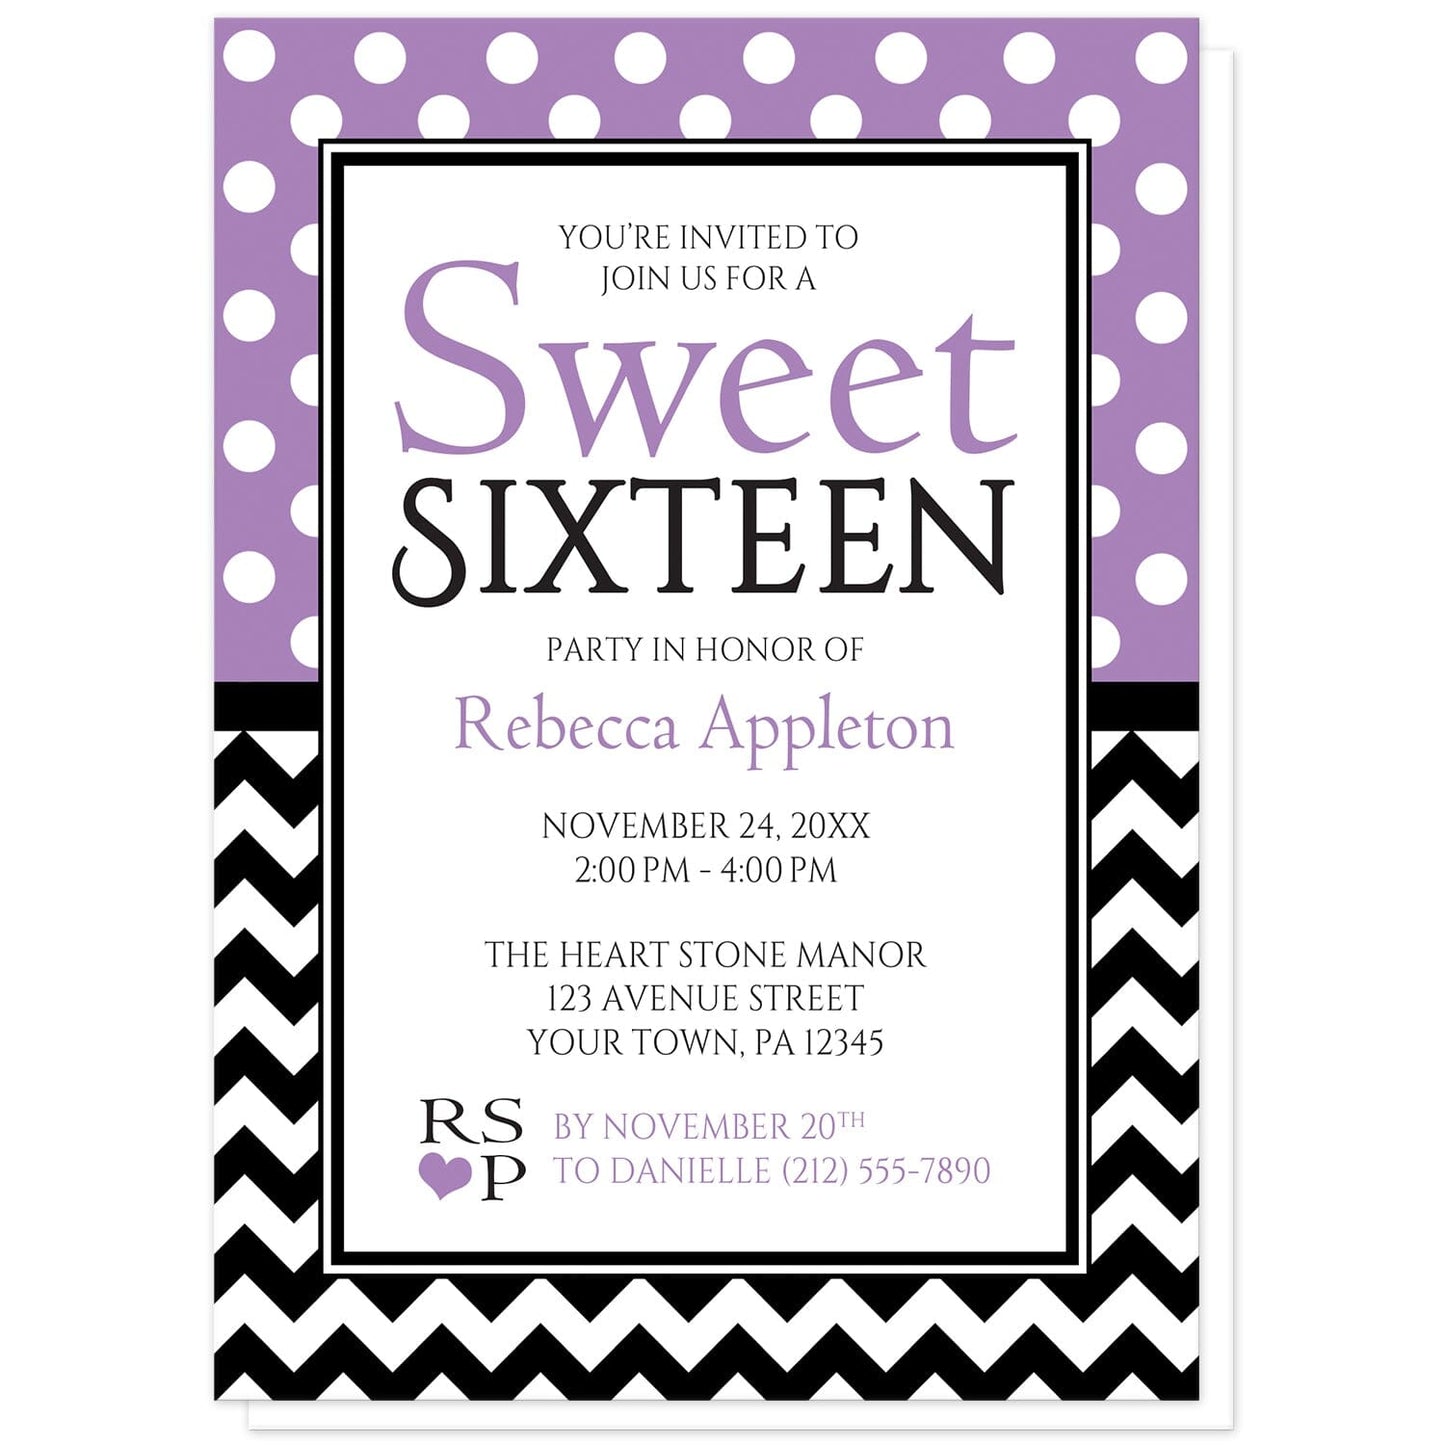 Polka Dot and Chevron Sweet 16 Invitations in Purple at Artistically Invited. Stylish patterned polka dot and chevron sweet 16 Invitations with white polka dots over purple on the top half and a black and white chevron zigzag pattern on the bottom half.  Your personalized sweet sixteen birthday party details are custom printed in purple and black in the center.